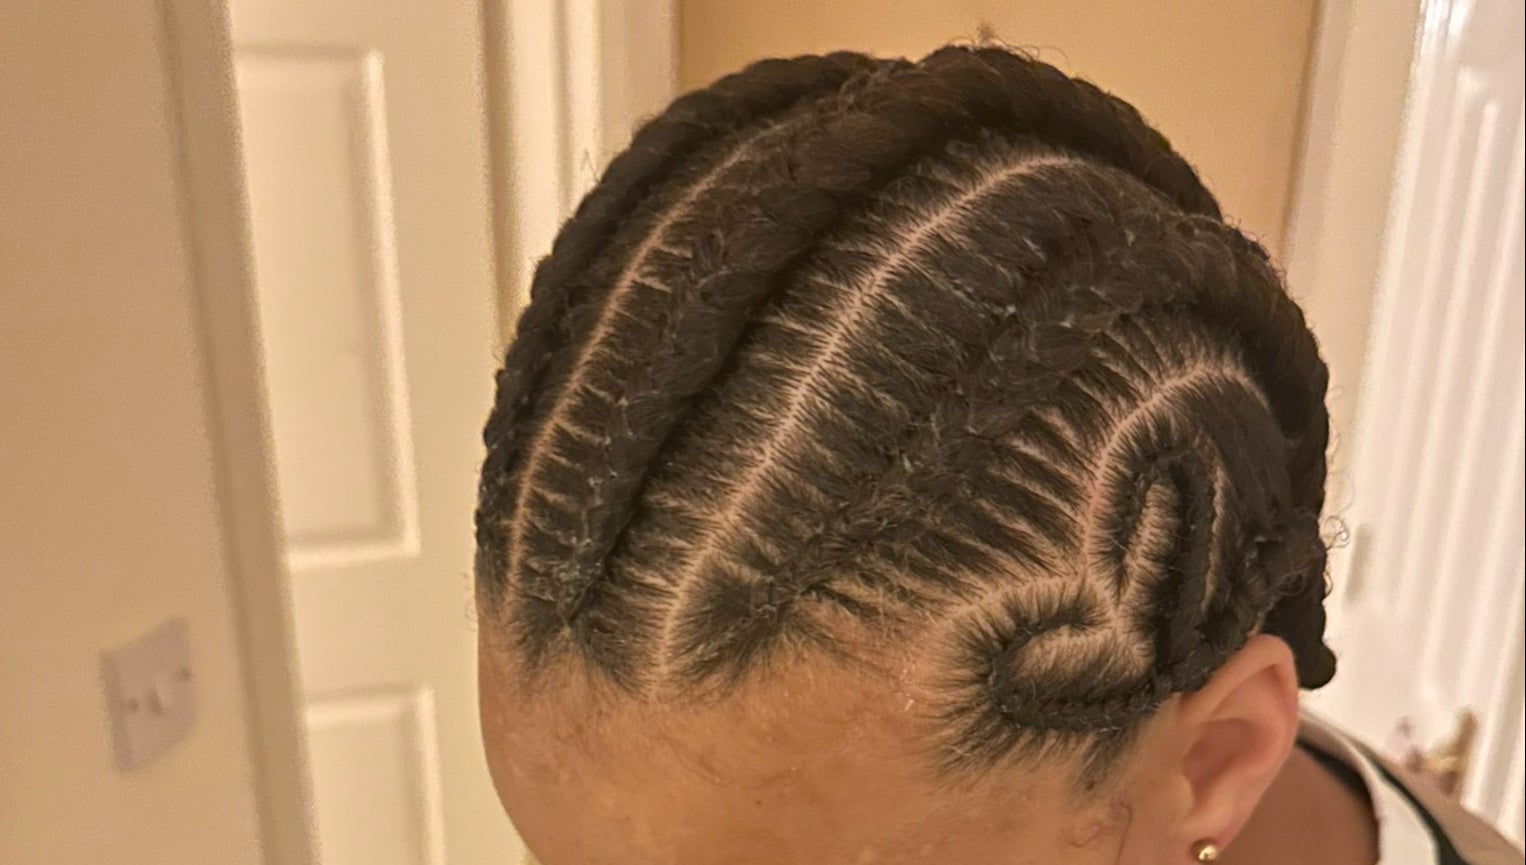 even tho i always look like a kid with only natural hair styles i love... |  cornrows on natural hair | TikTok